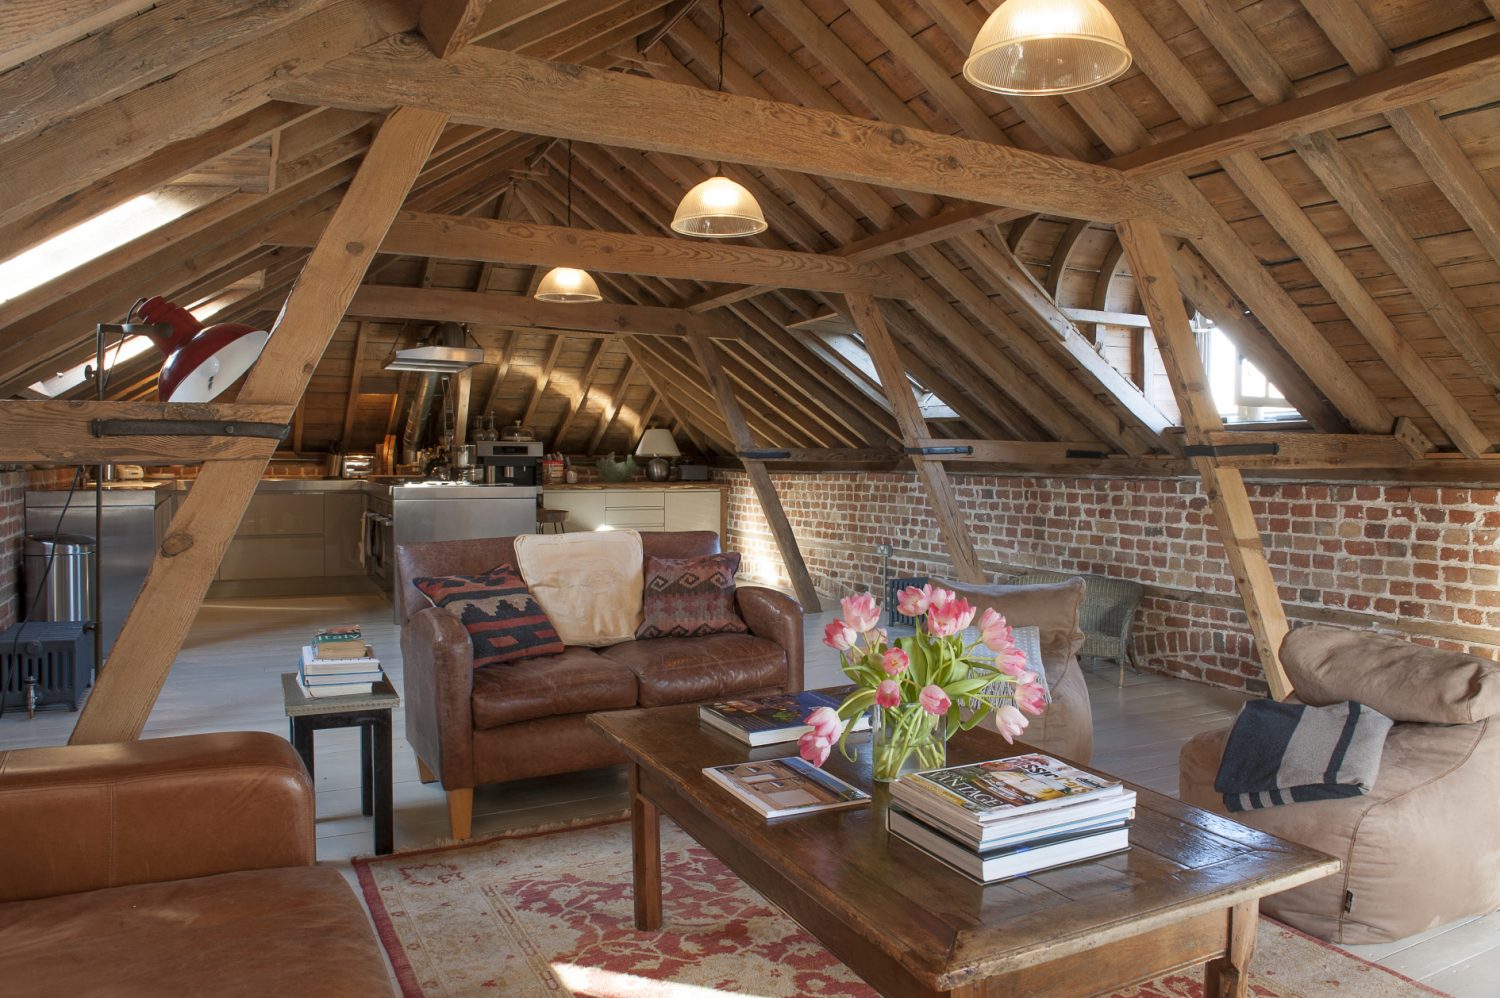 The spectacular space that was once the hay loft boasts superb 230-year-old timbers, every inch now sandblasted and lovingly waxed by hand to a honeyed glow. The only part of the building the couple were unable to save were the floorboards that have now been replaced with irregular-sized painted boards